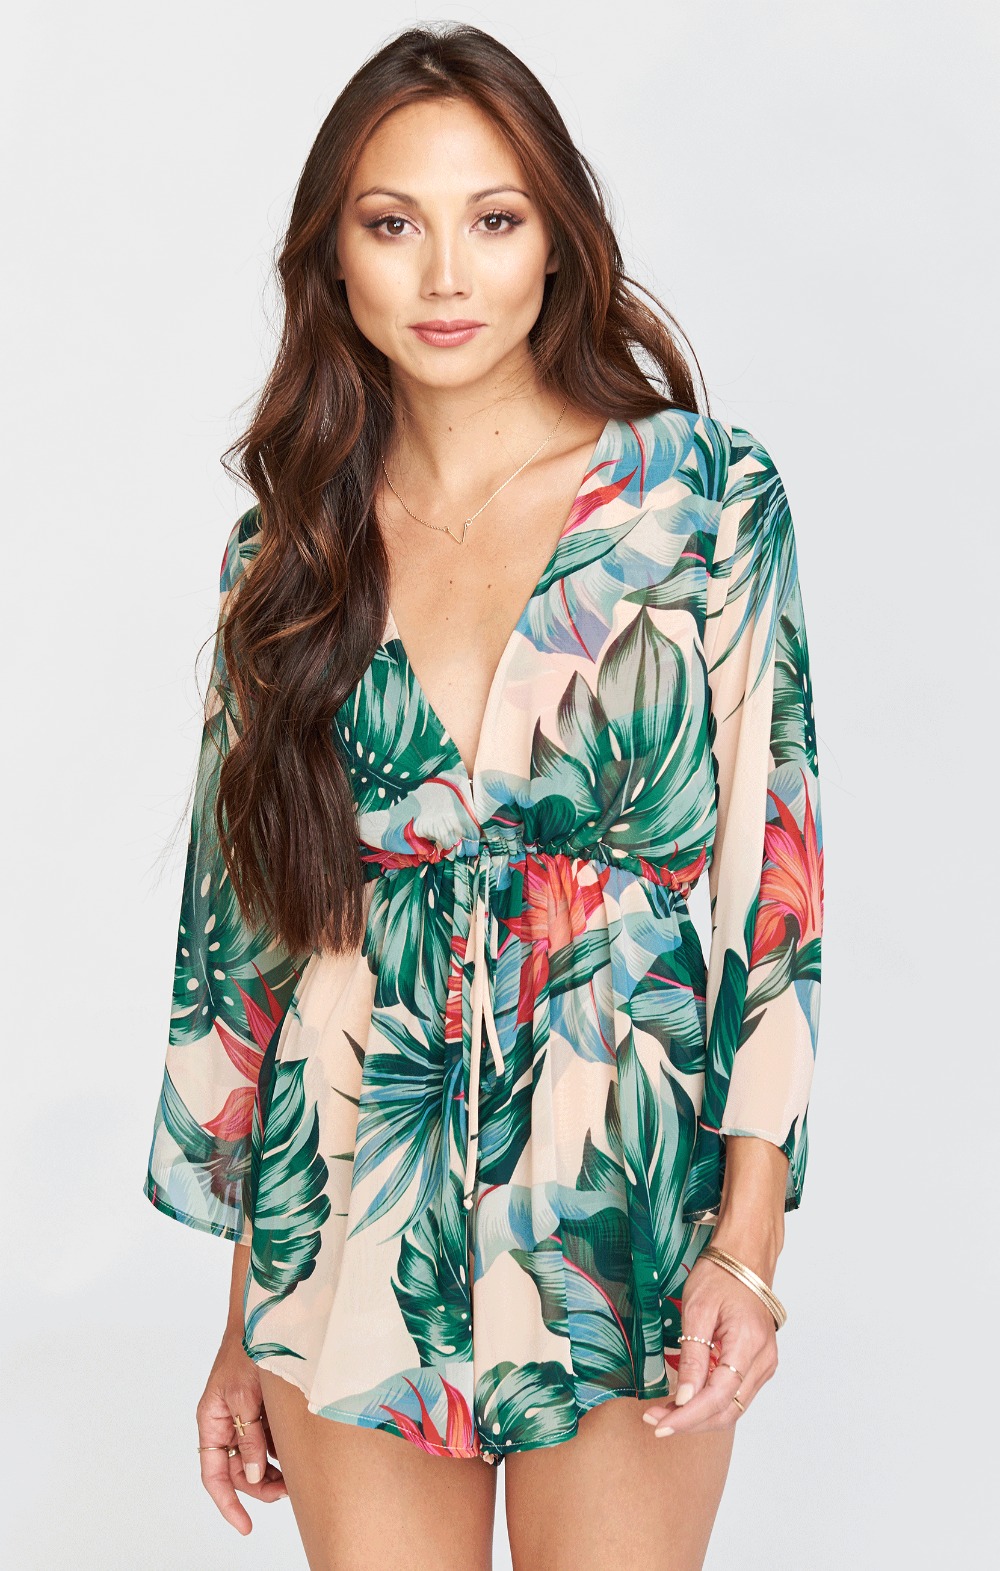 Winter Bridesmaids Collection From Show Me Your Mumu